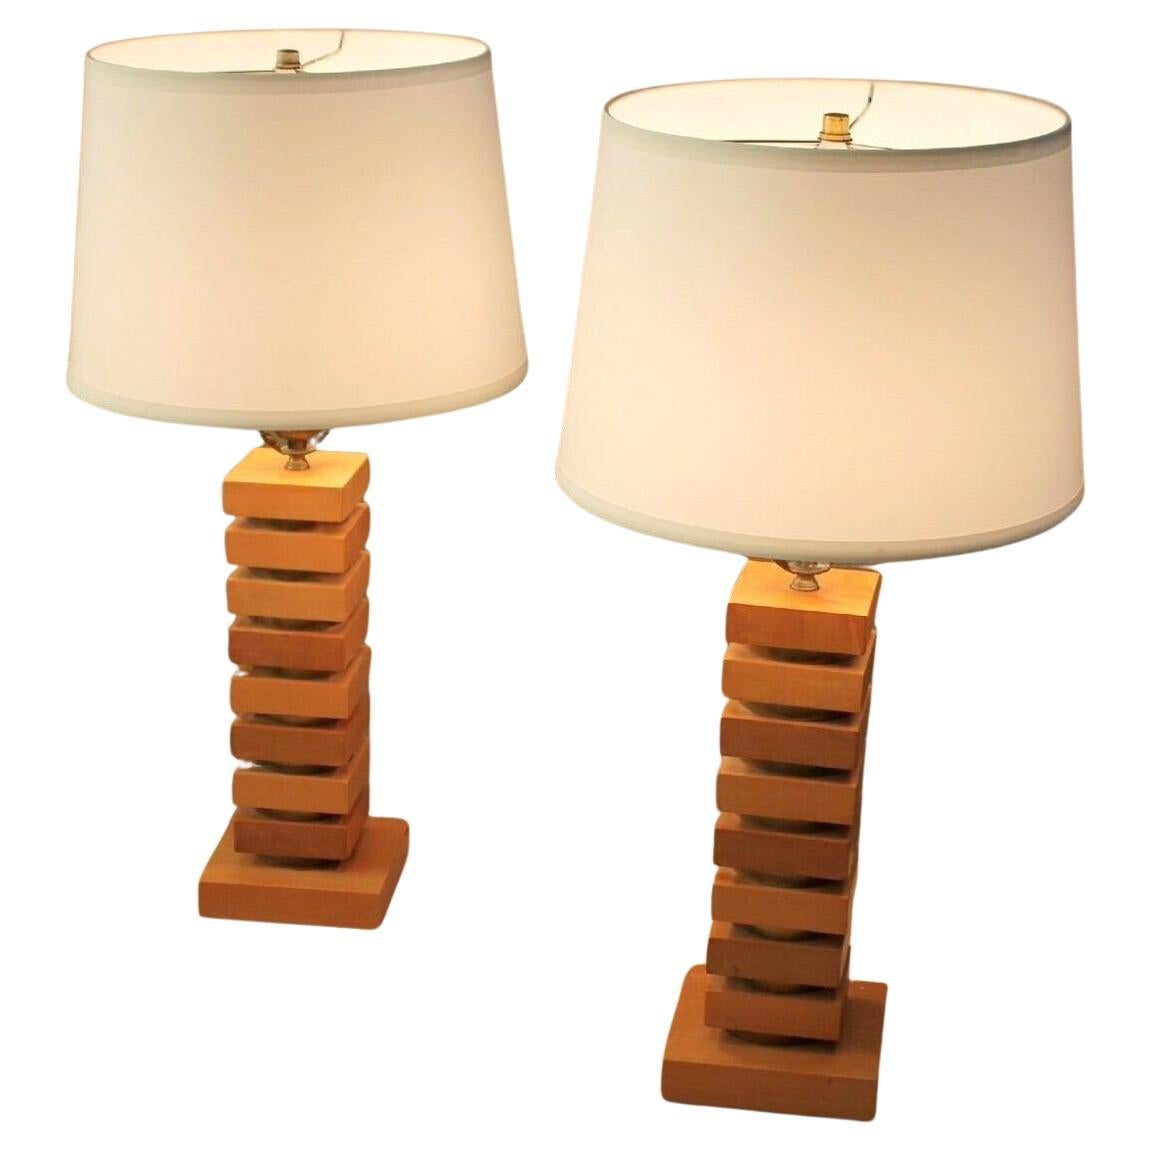 PAIR! ART DECO Maple & Brass STACKED 1940s Table Lamps Russel Wright Skyscraper For Sale